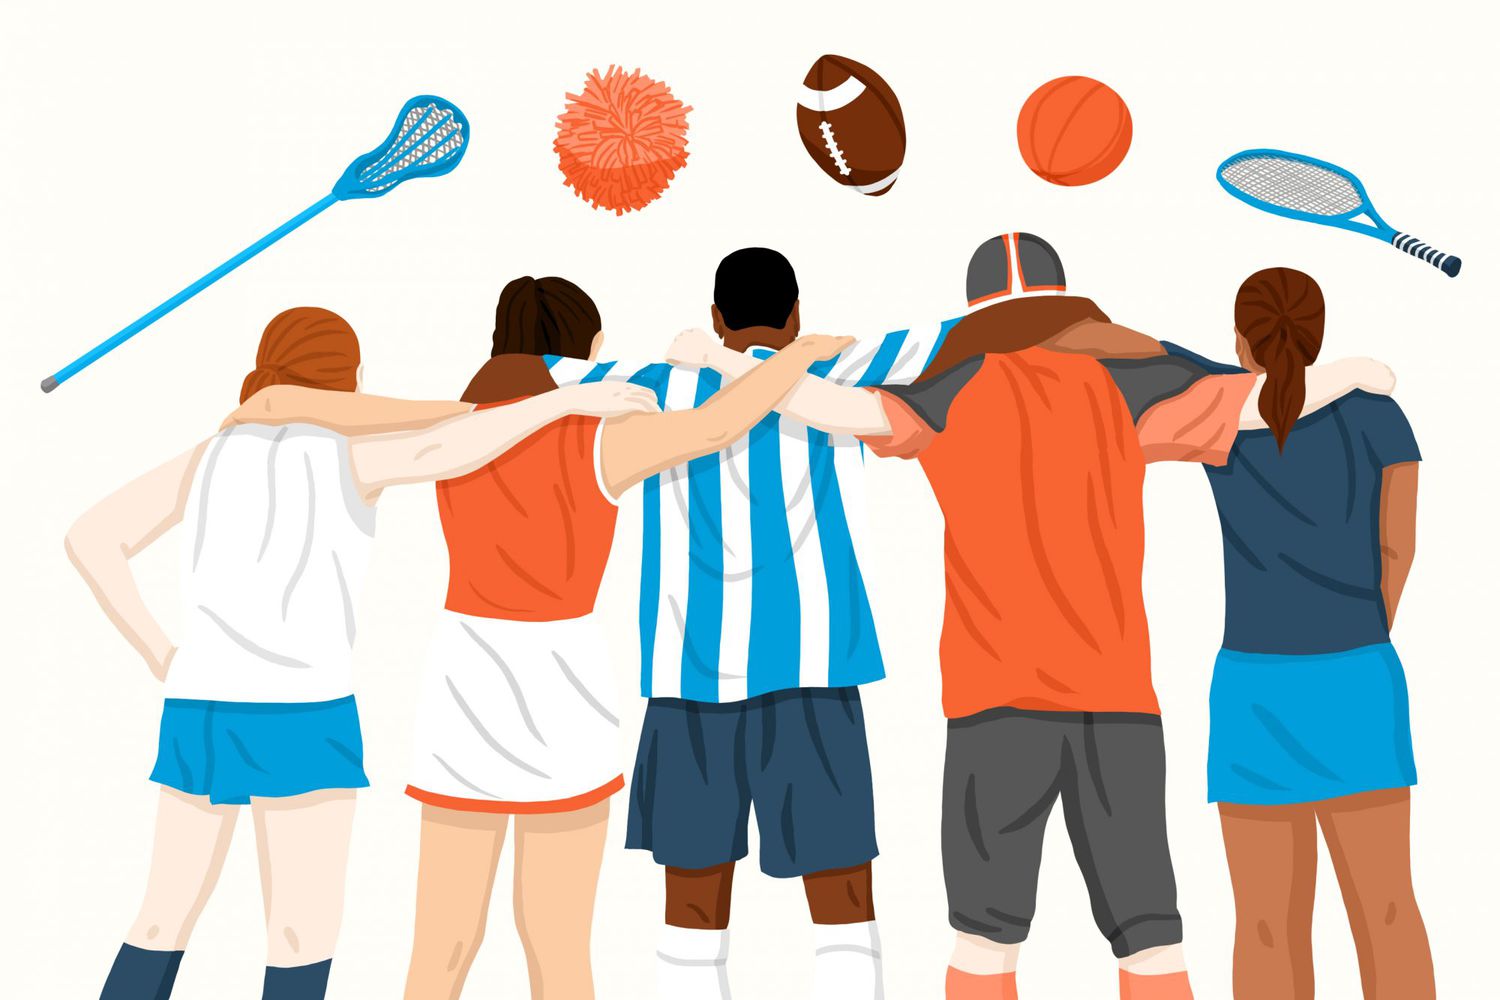 An illustration of a group athletes together.